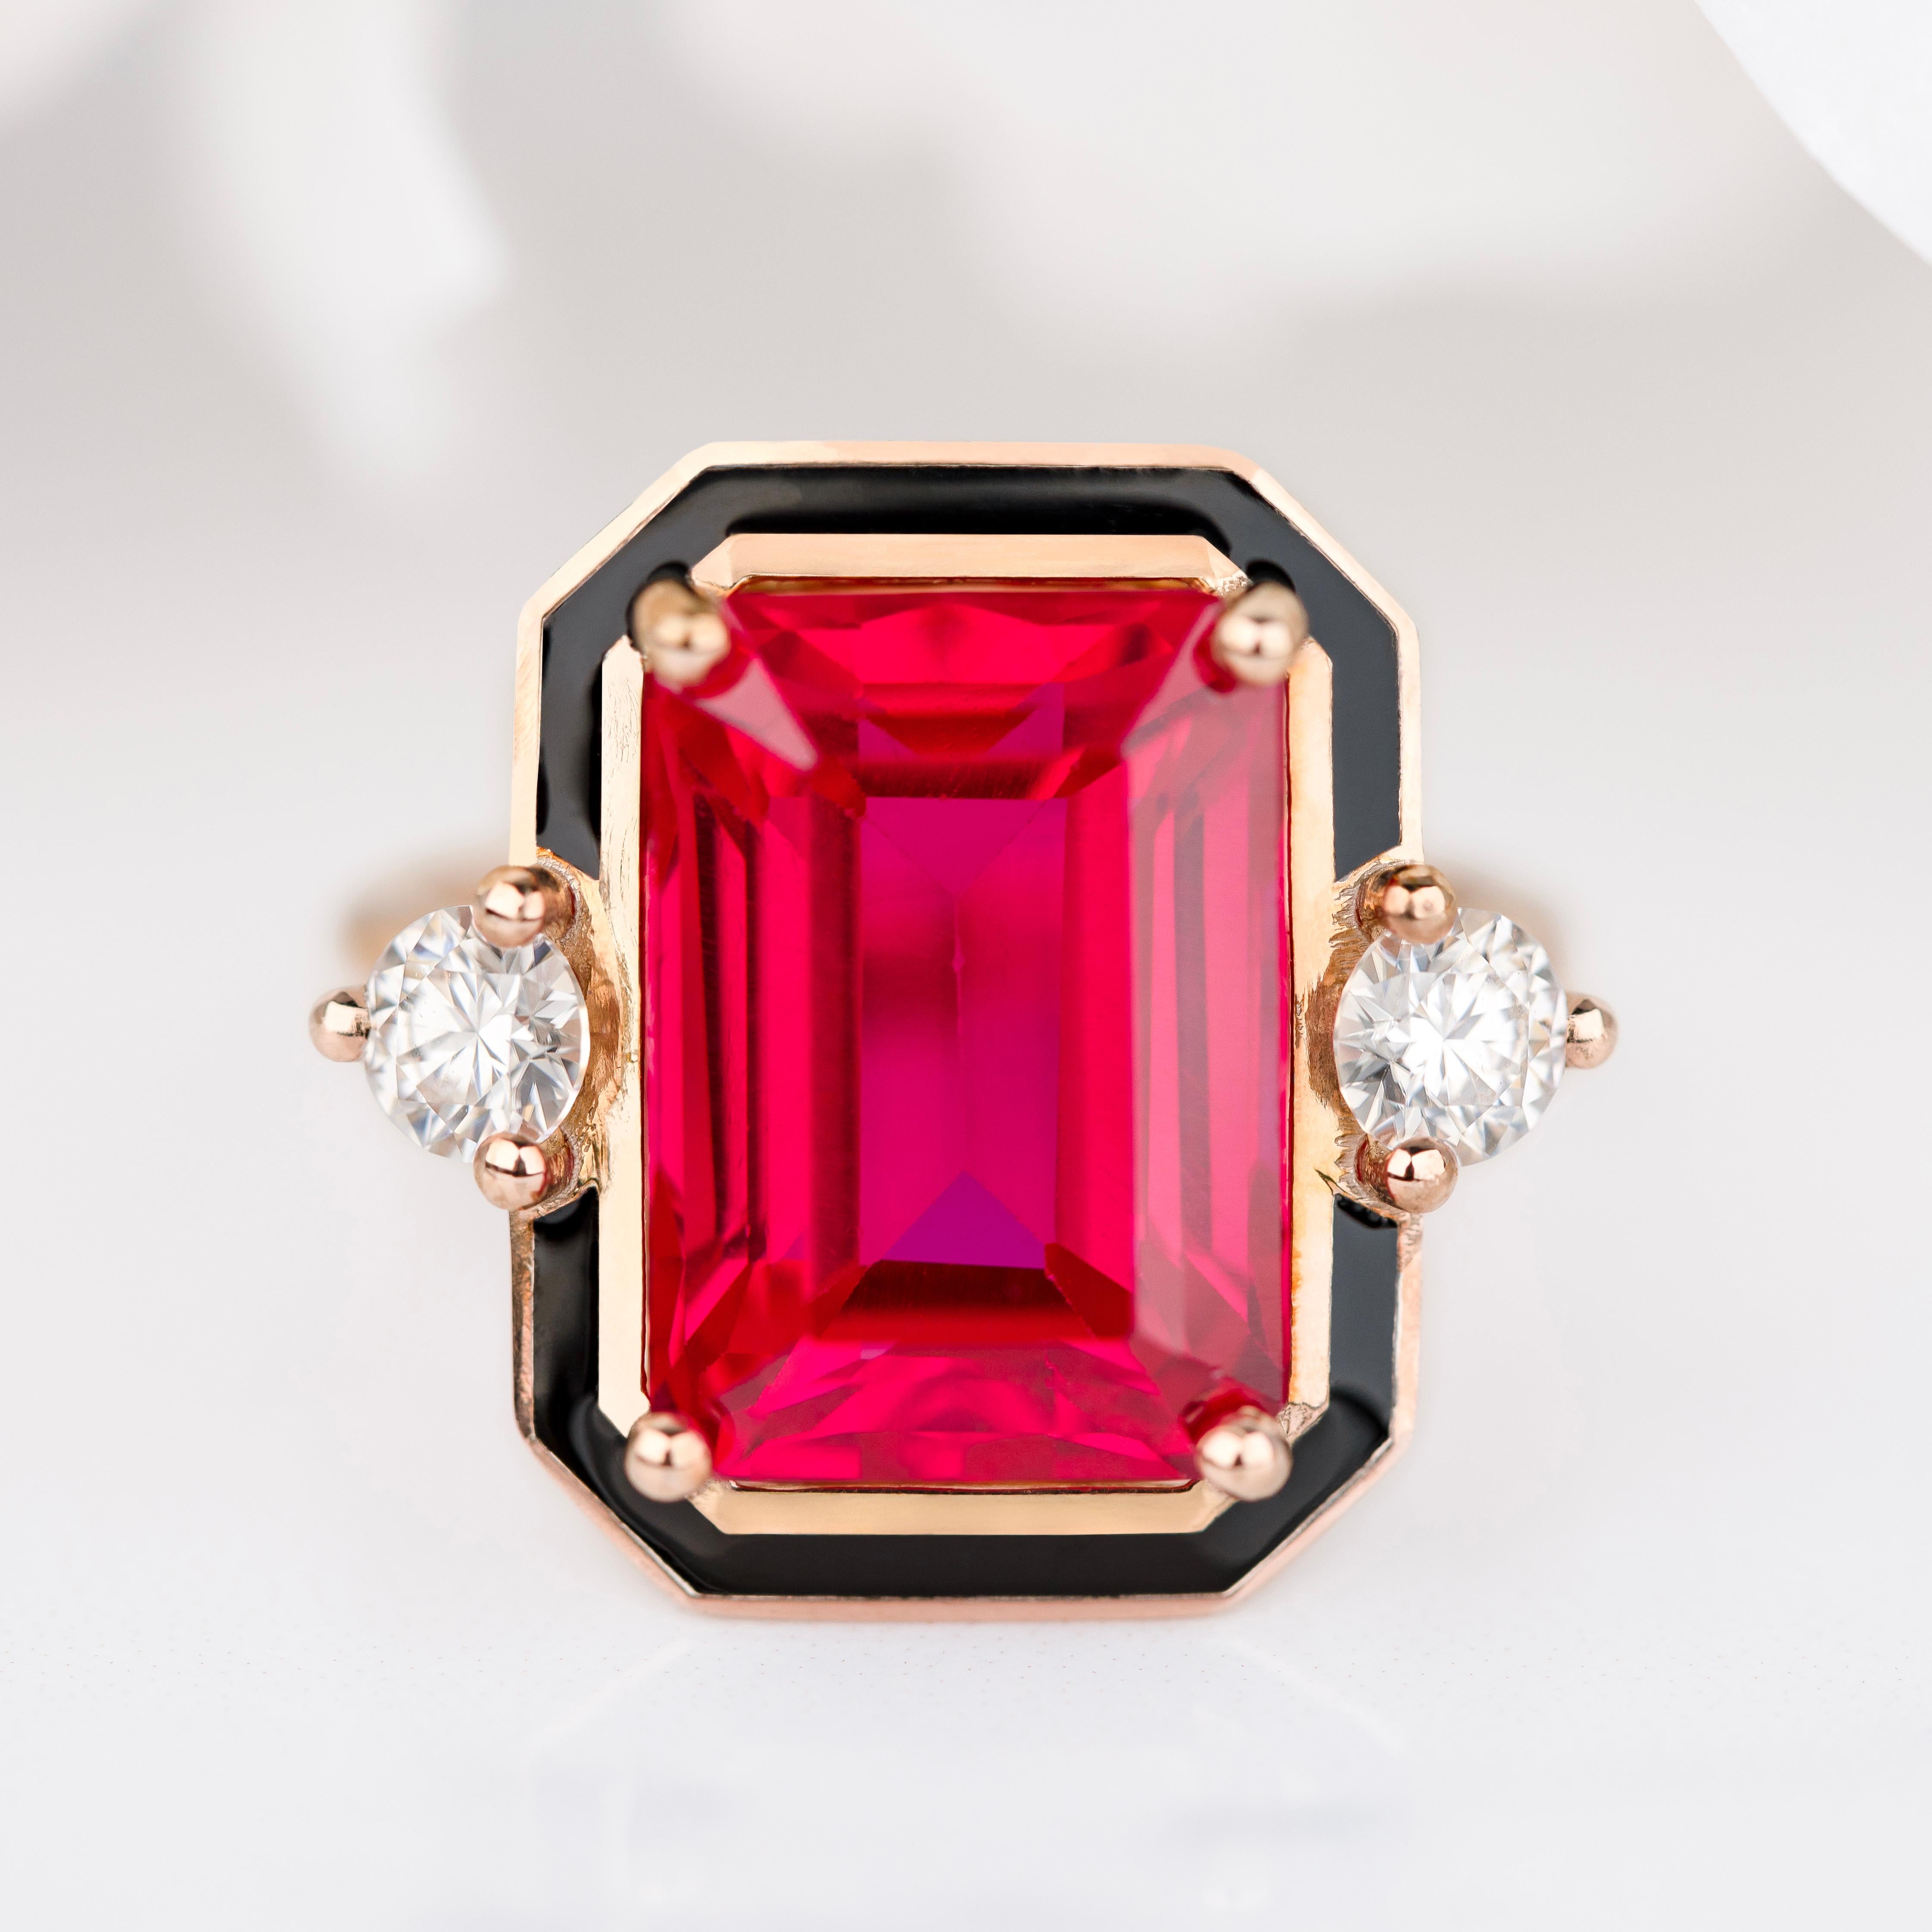 Art Deco Style Ring, Synthetic Ruby and Moissanite Stone Ring, 14K Gold Ring

This ring was made with quality materials and excellent handwork. I guarantee the quality assurance of my handwork and materials. It is vital for me that you are totally